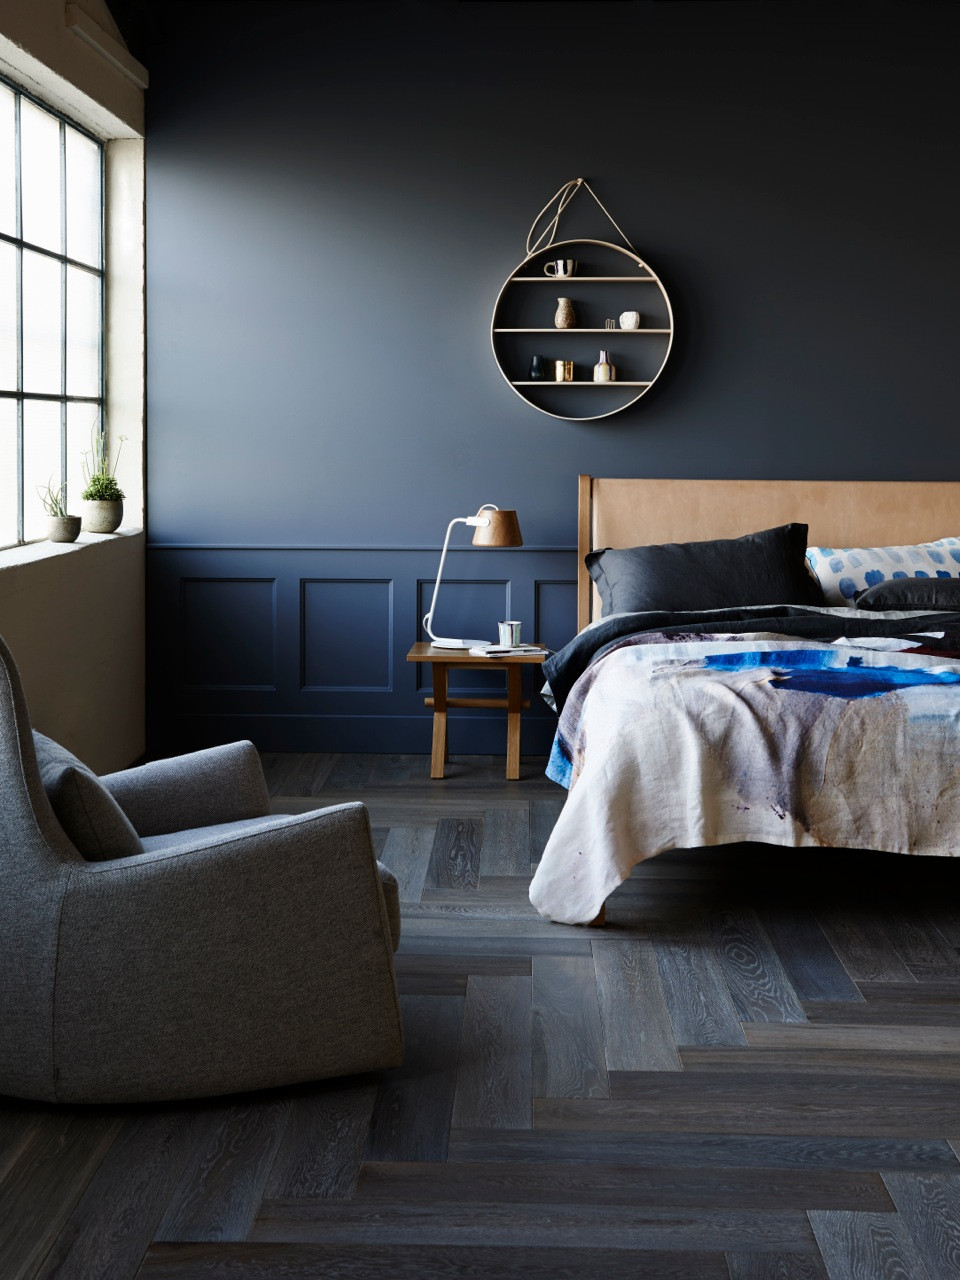 Blue Walls Bedroom
 Daring to go dark How to bring a designer edge to your home